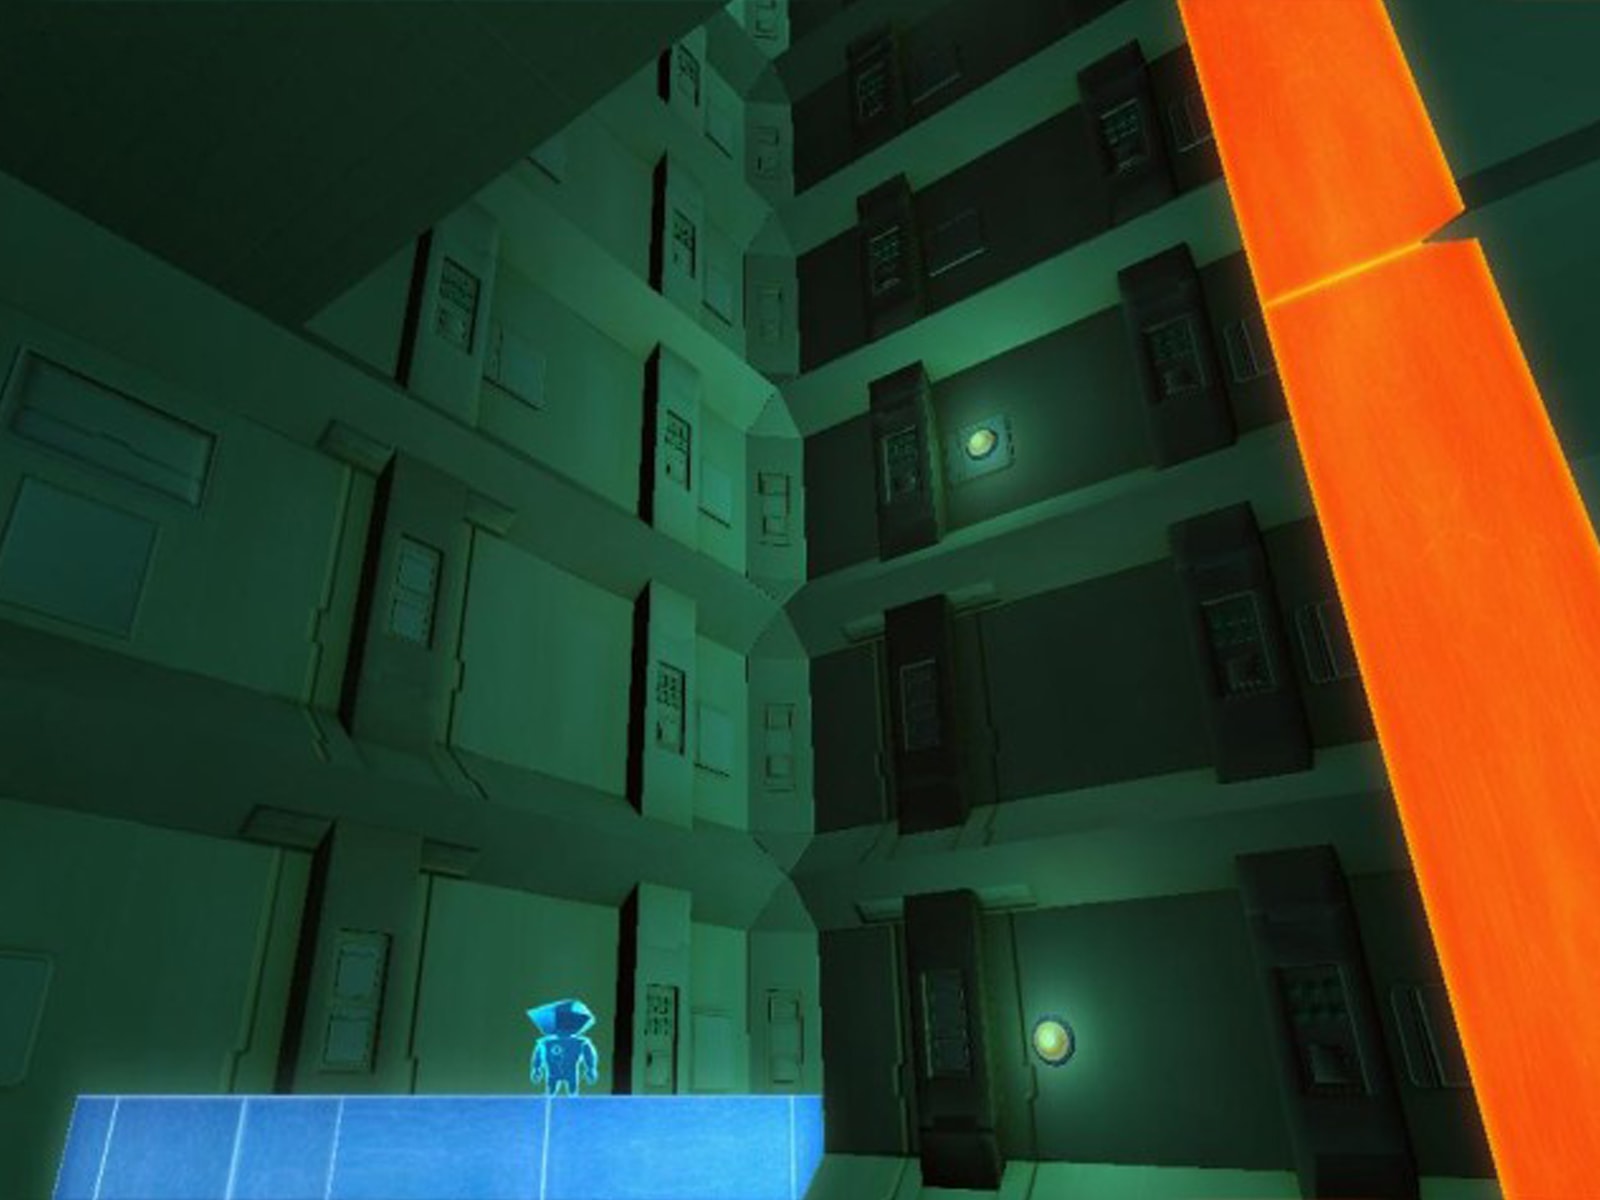 Screenshot from DigiPen student game Perspective of the main character looking up at building walls